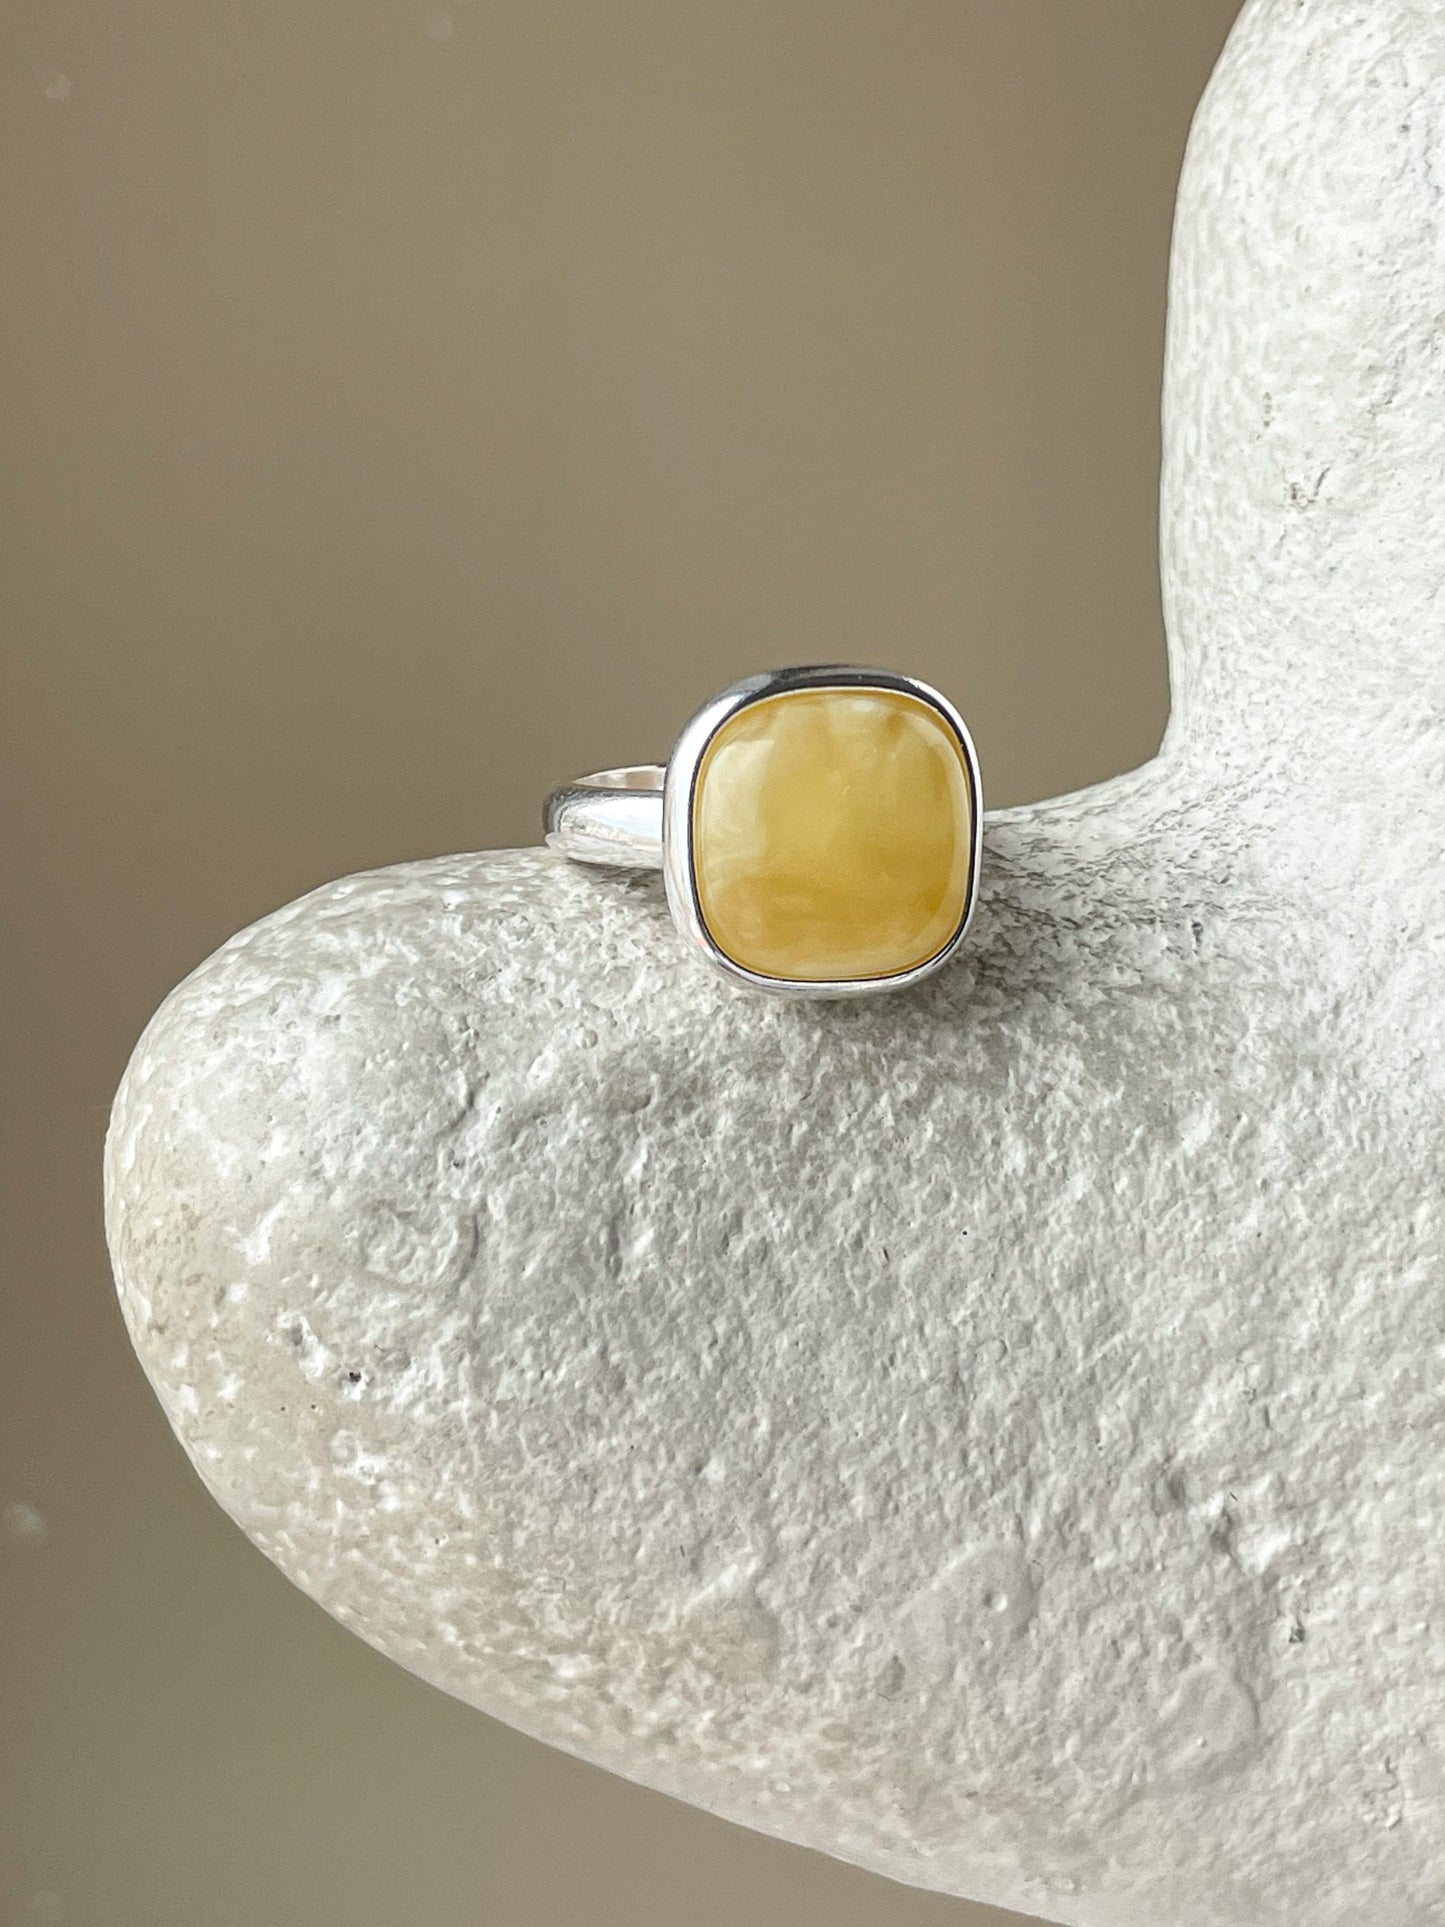 Honey amber ring - Sterling silver - Large ring collection - Size 7 1/2